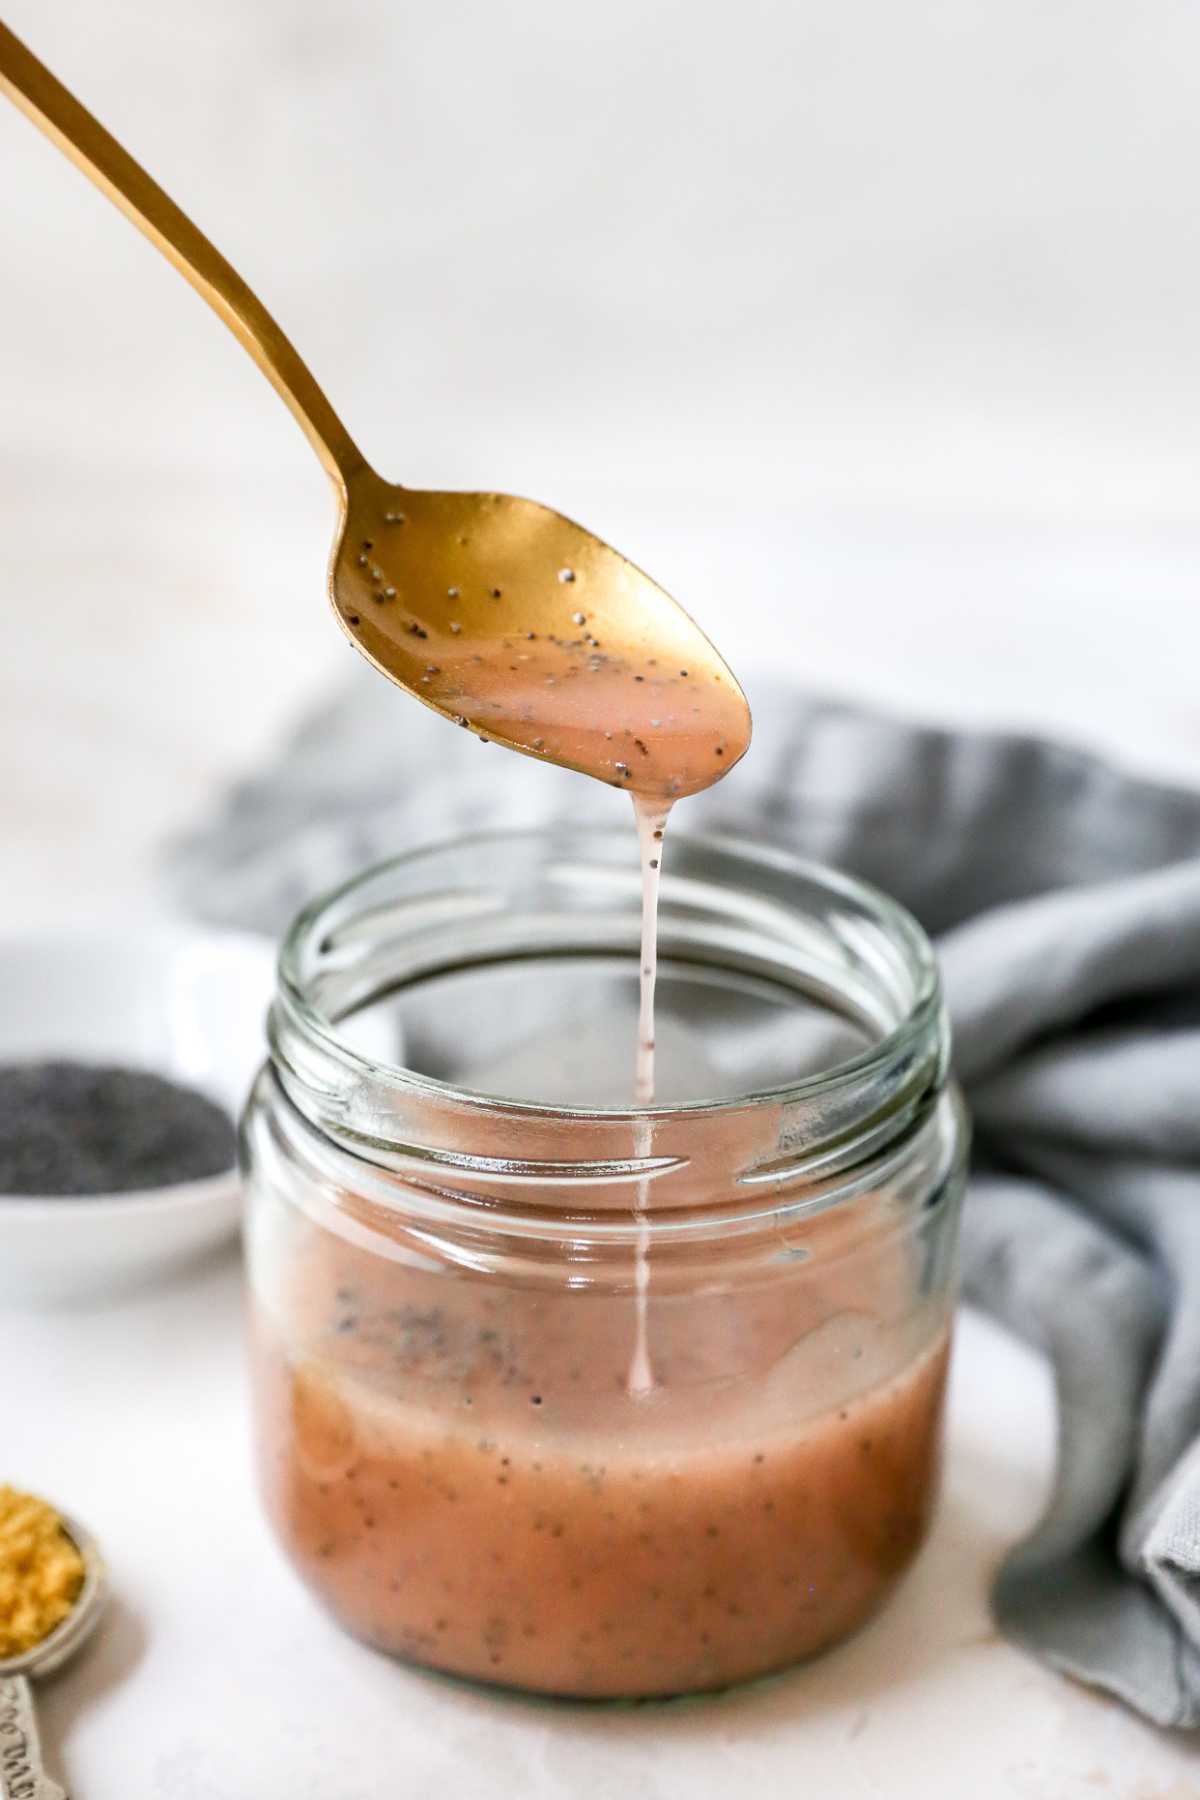 Drizzling dressing from a spoon into a glass jar.